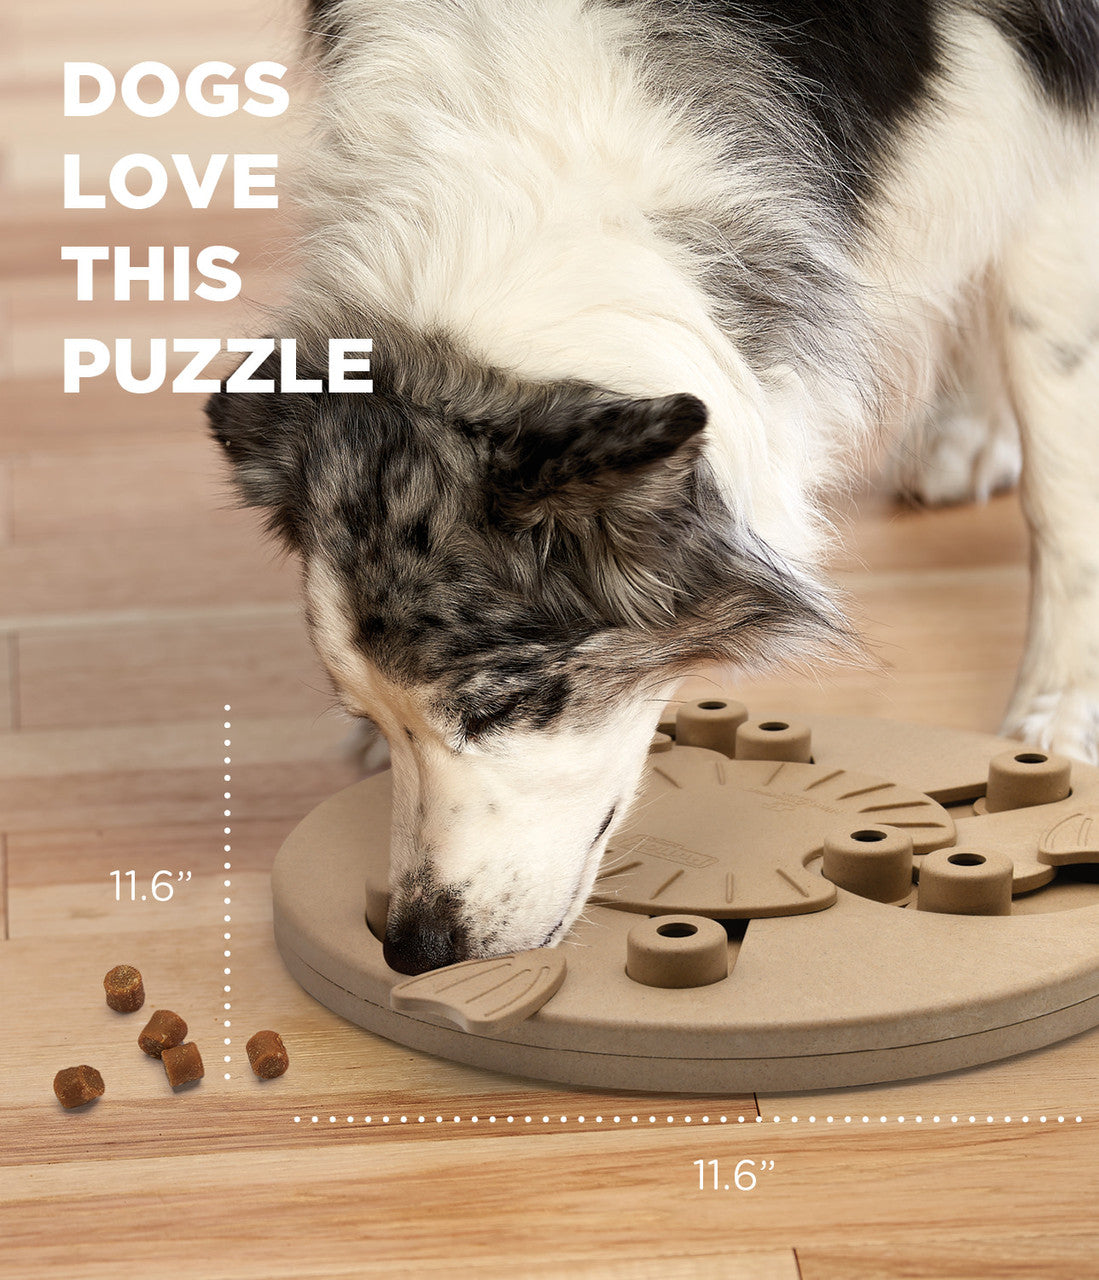 Nina Ottosson DogWorker, level 3 puzzle. Spin, scoot and treat! 